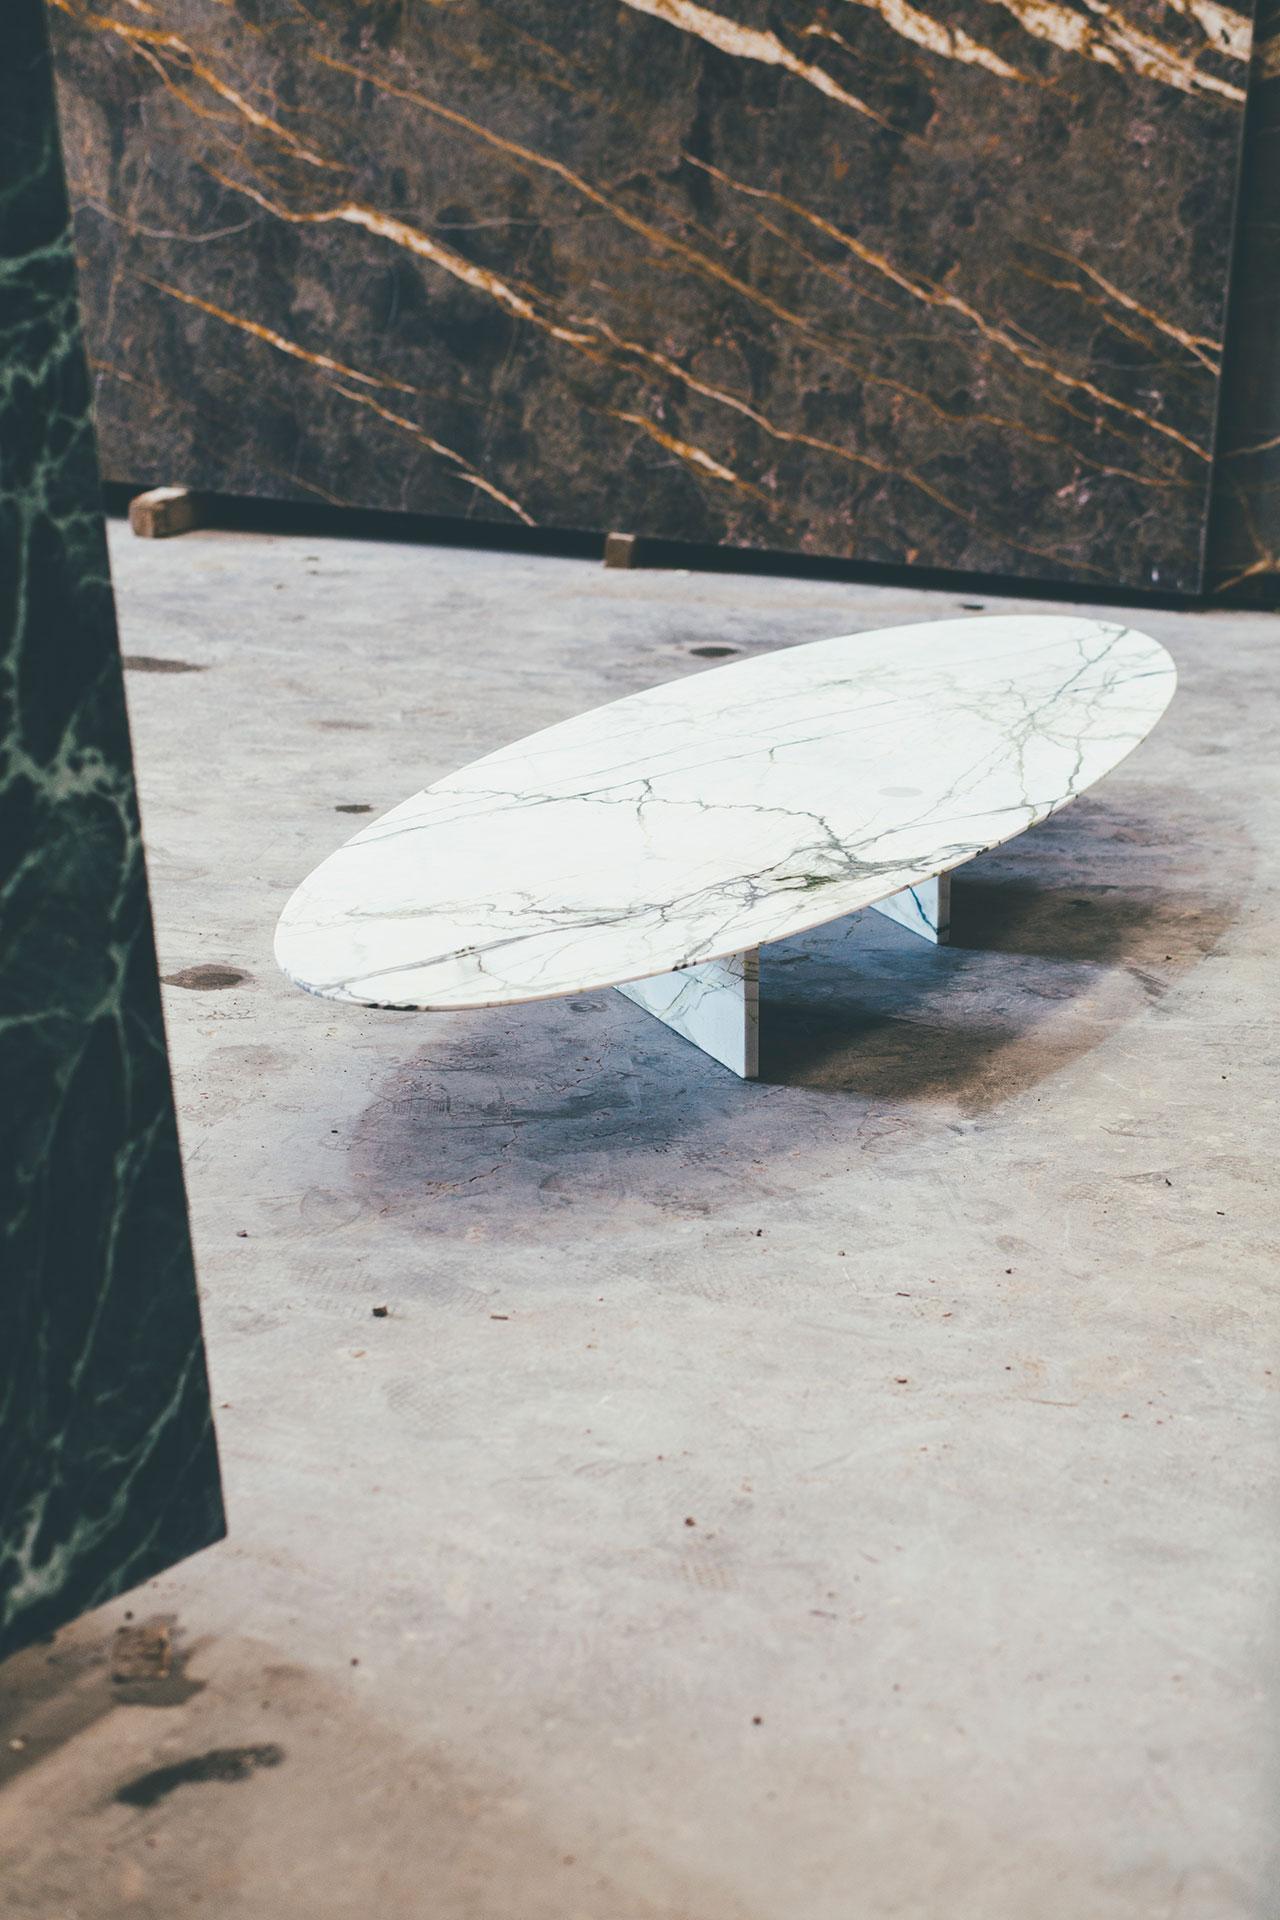 Ellipse low table by Jeroen Thys van den Audenaerde.
Dimensions: 23.5 x 220 x 74 cm.
Marble and brass.

Made of carefully chosen marble and finished with functional
brass details. These collectible pieces come in a limited edition.

Barh is a